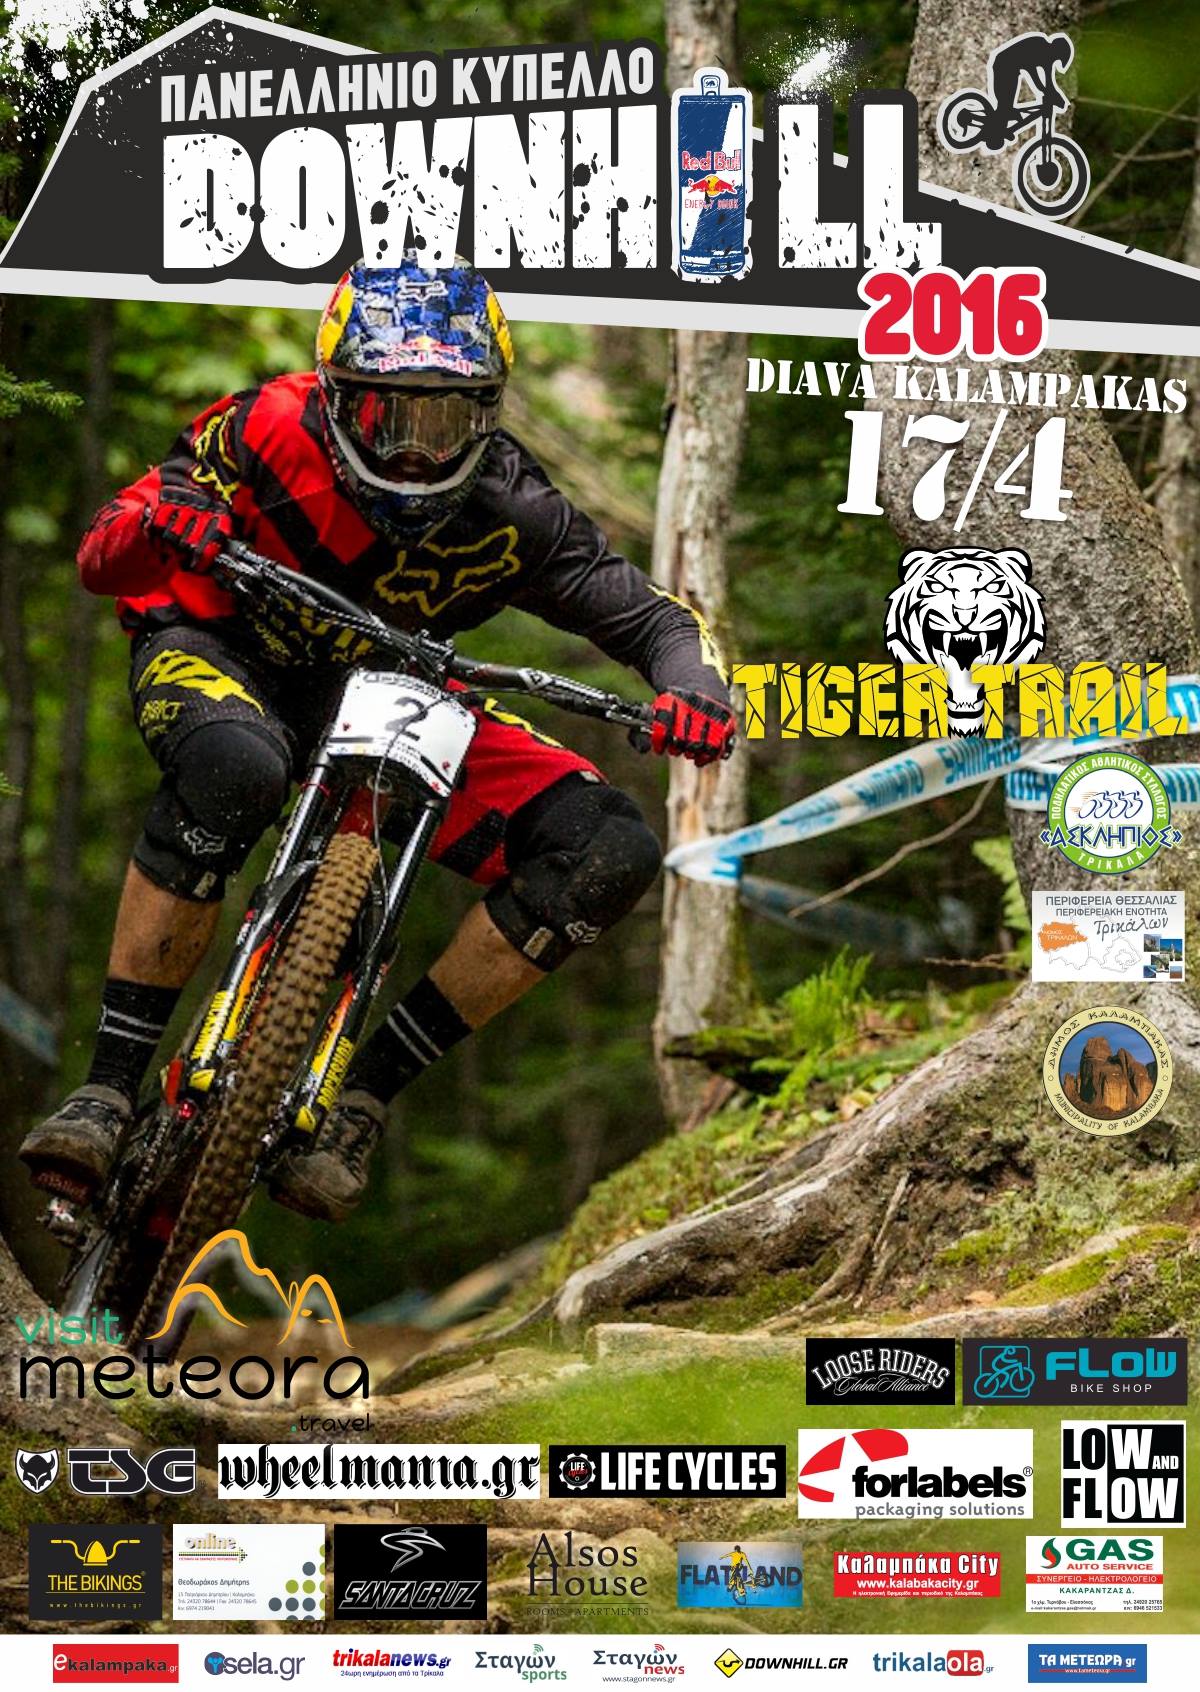 tiger trail2016 poster